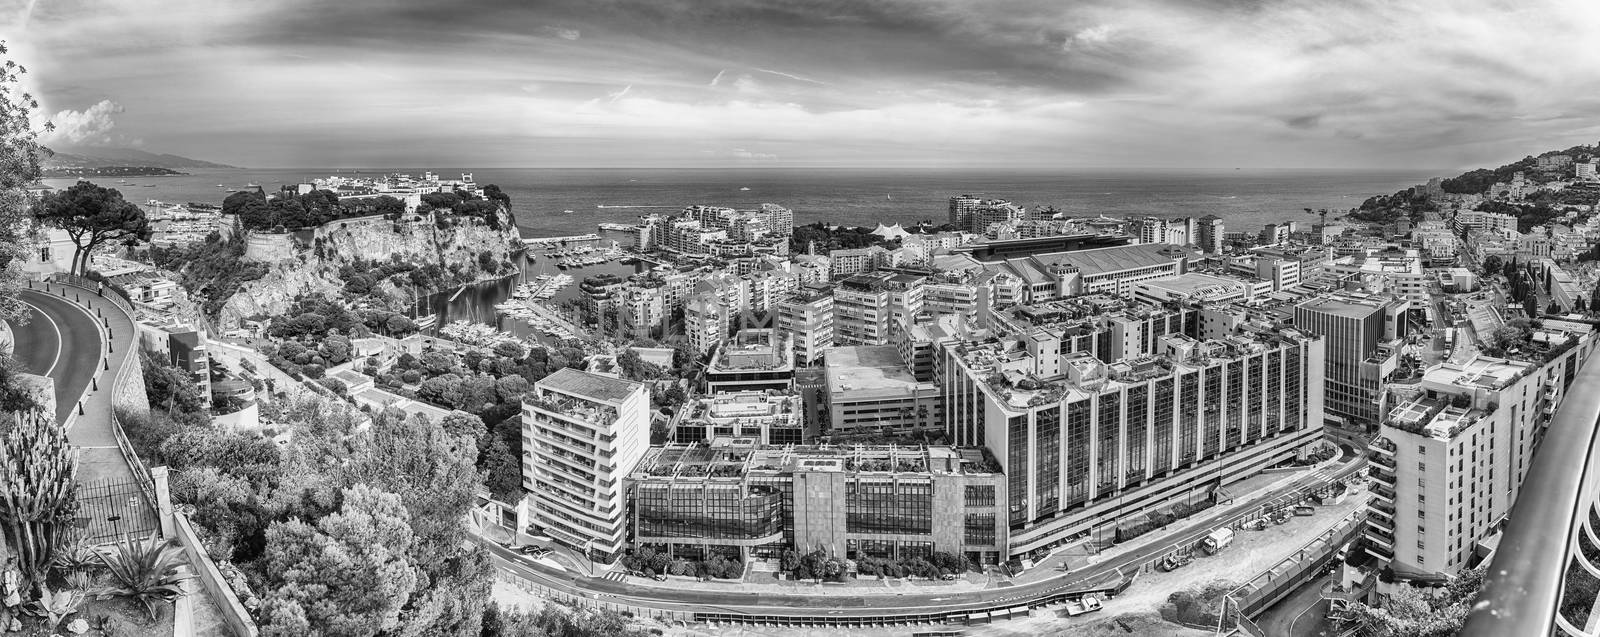 Panoramic view of Fontvieille district in the Principality of Mo by marcorubino